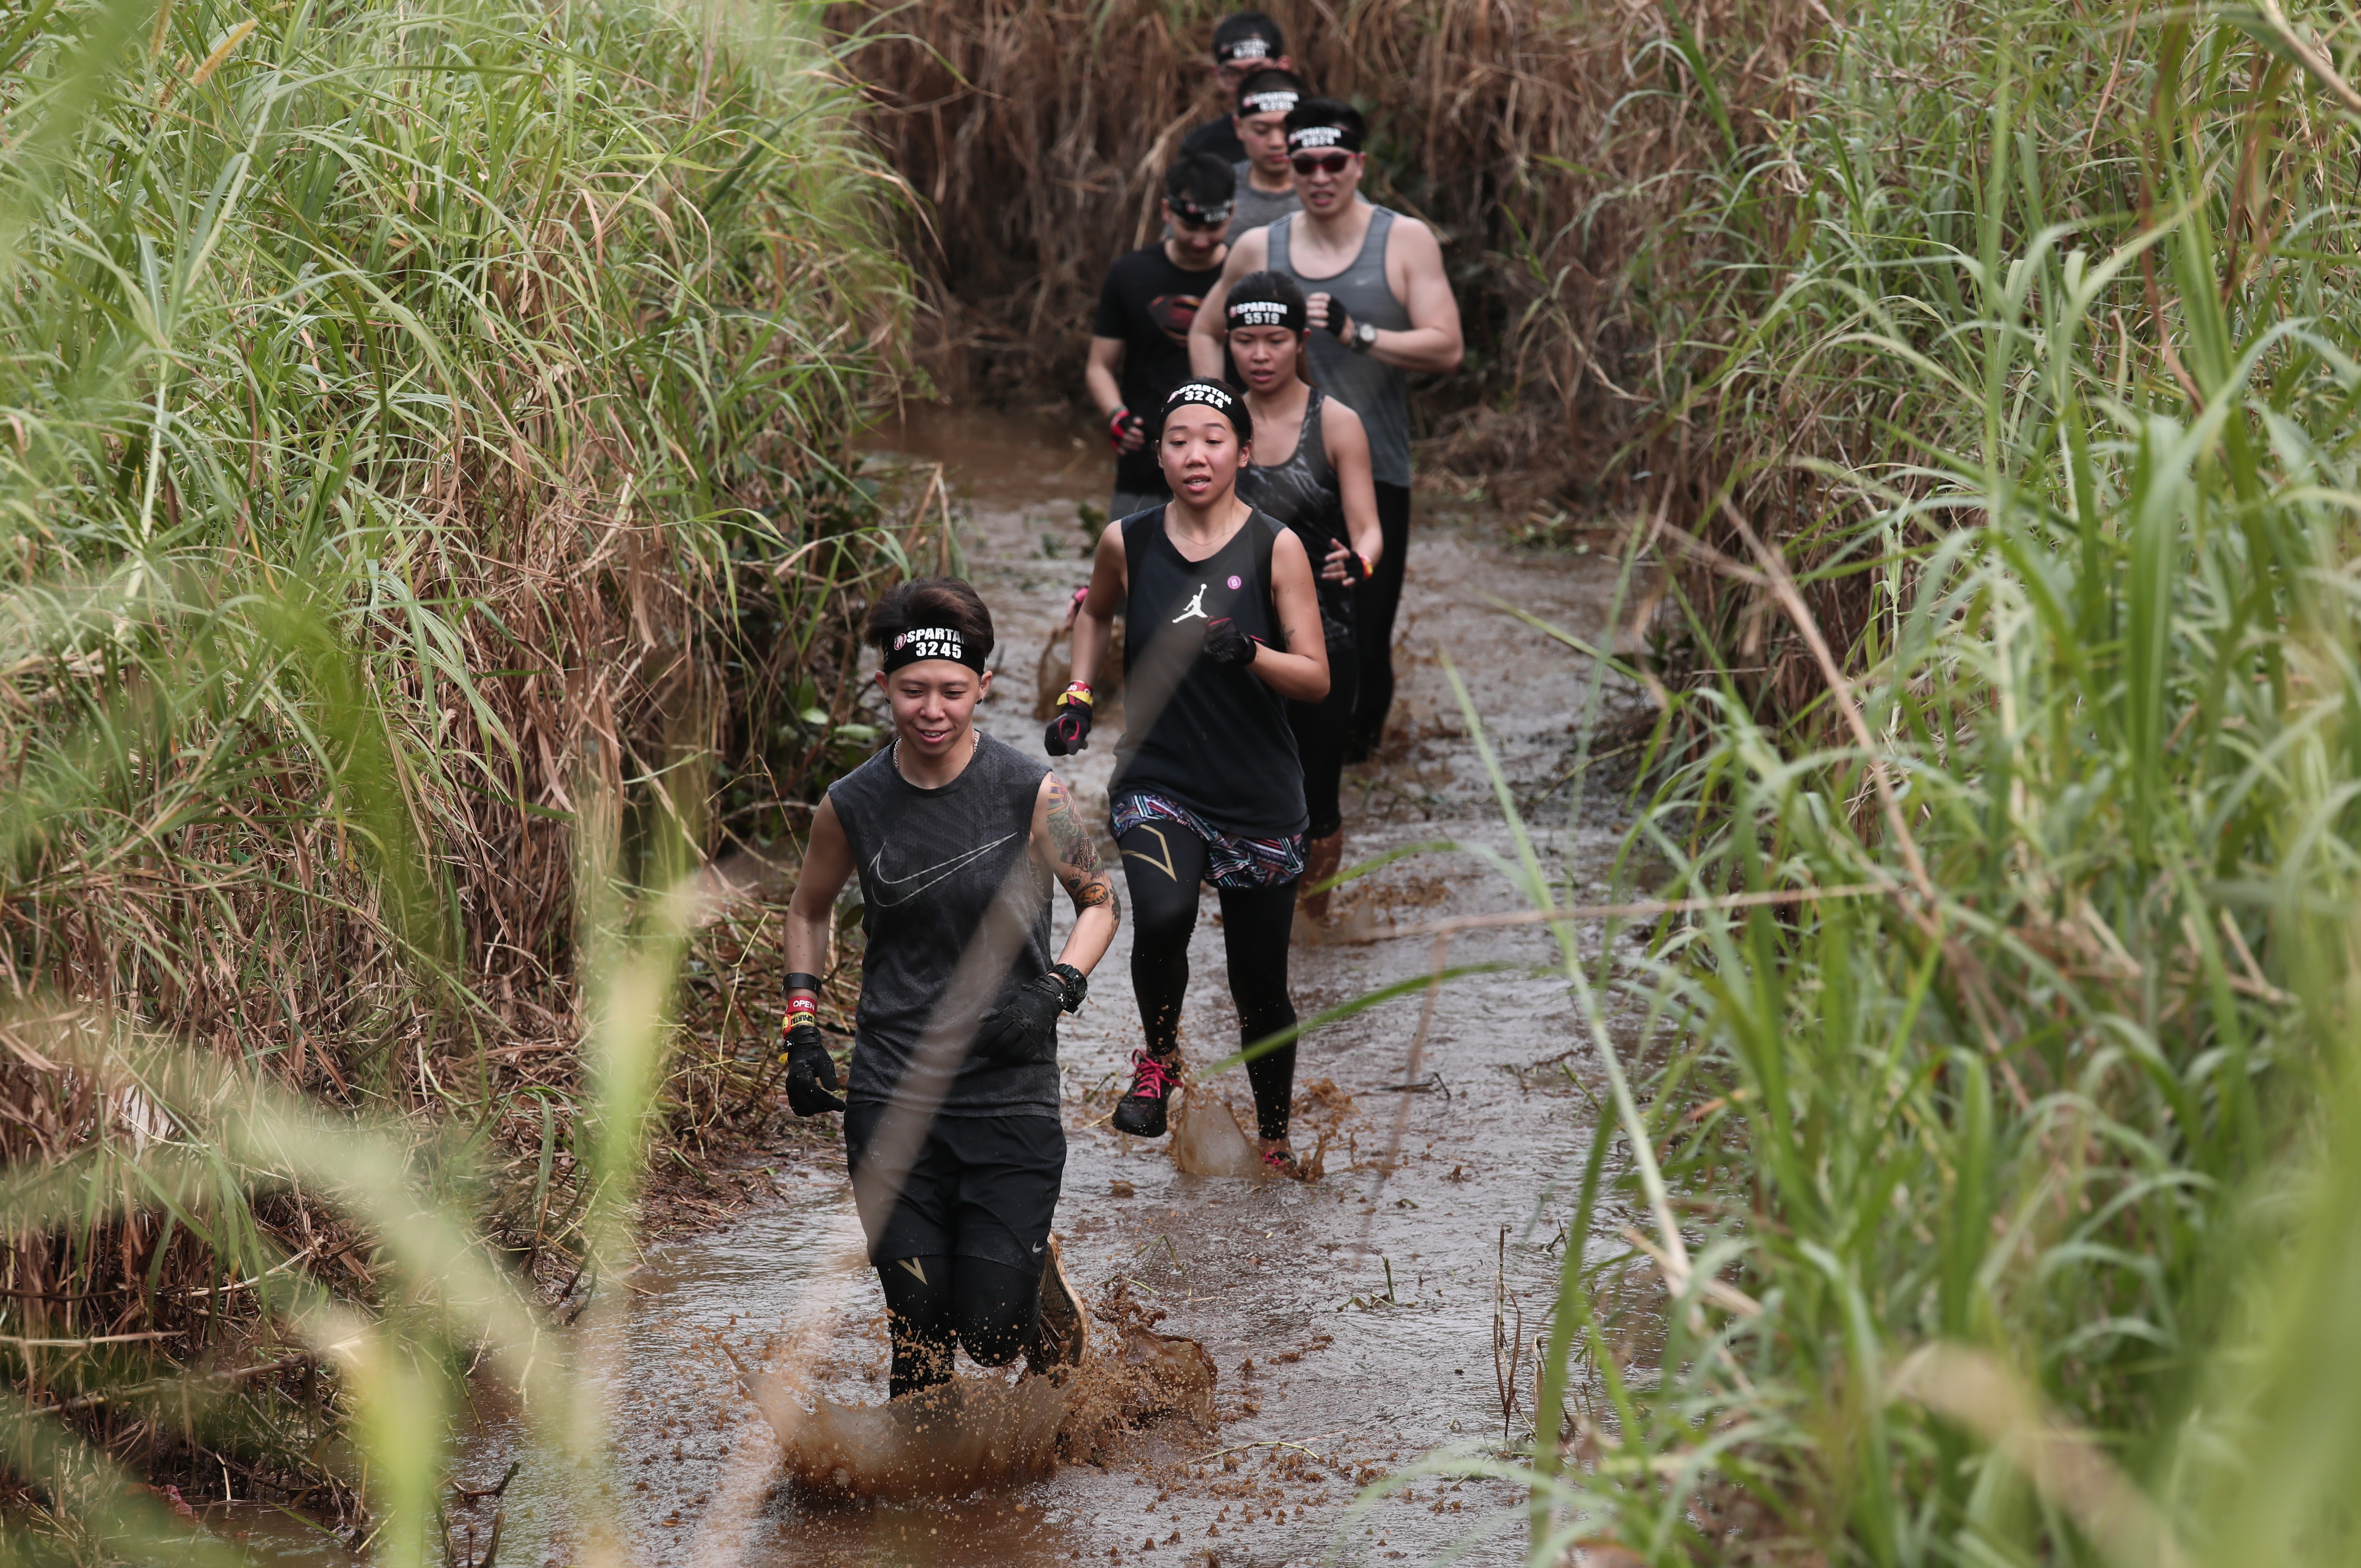 The Spartan Race starts with a run through mud. To our horror, we found out this did no count as one of the 20 obstacles. Photos: Jonathan Wong